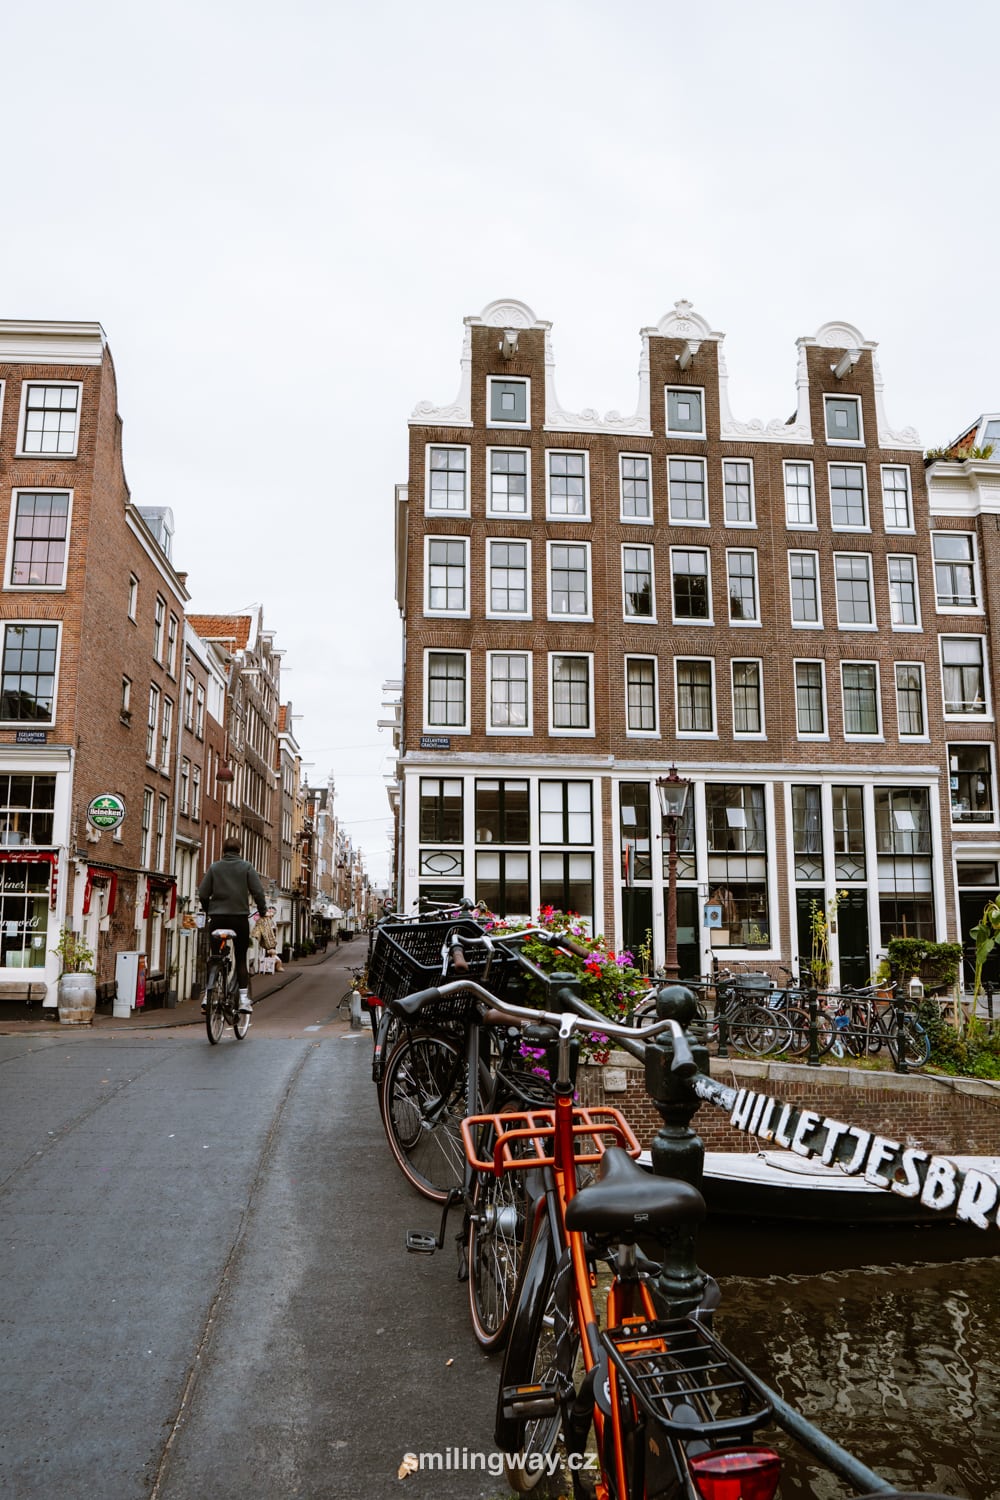 Amsterdam in 3 days / what to see and visit in Amsterdam